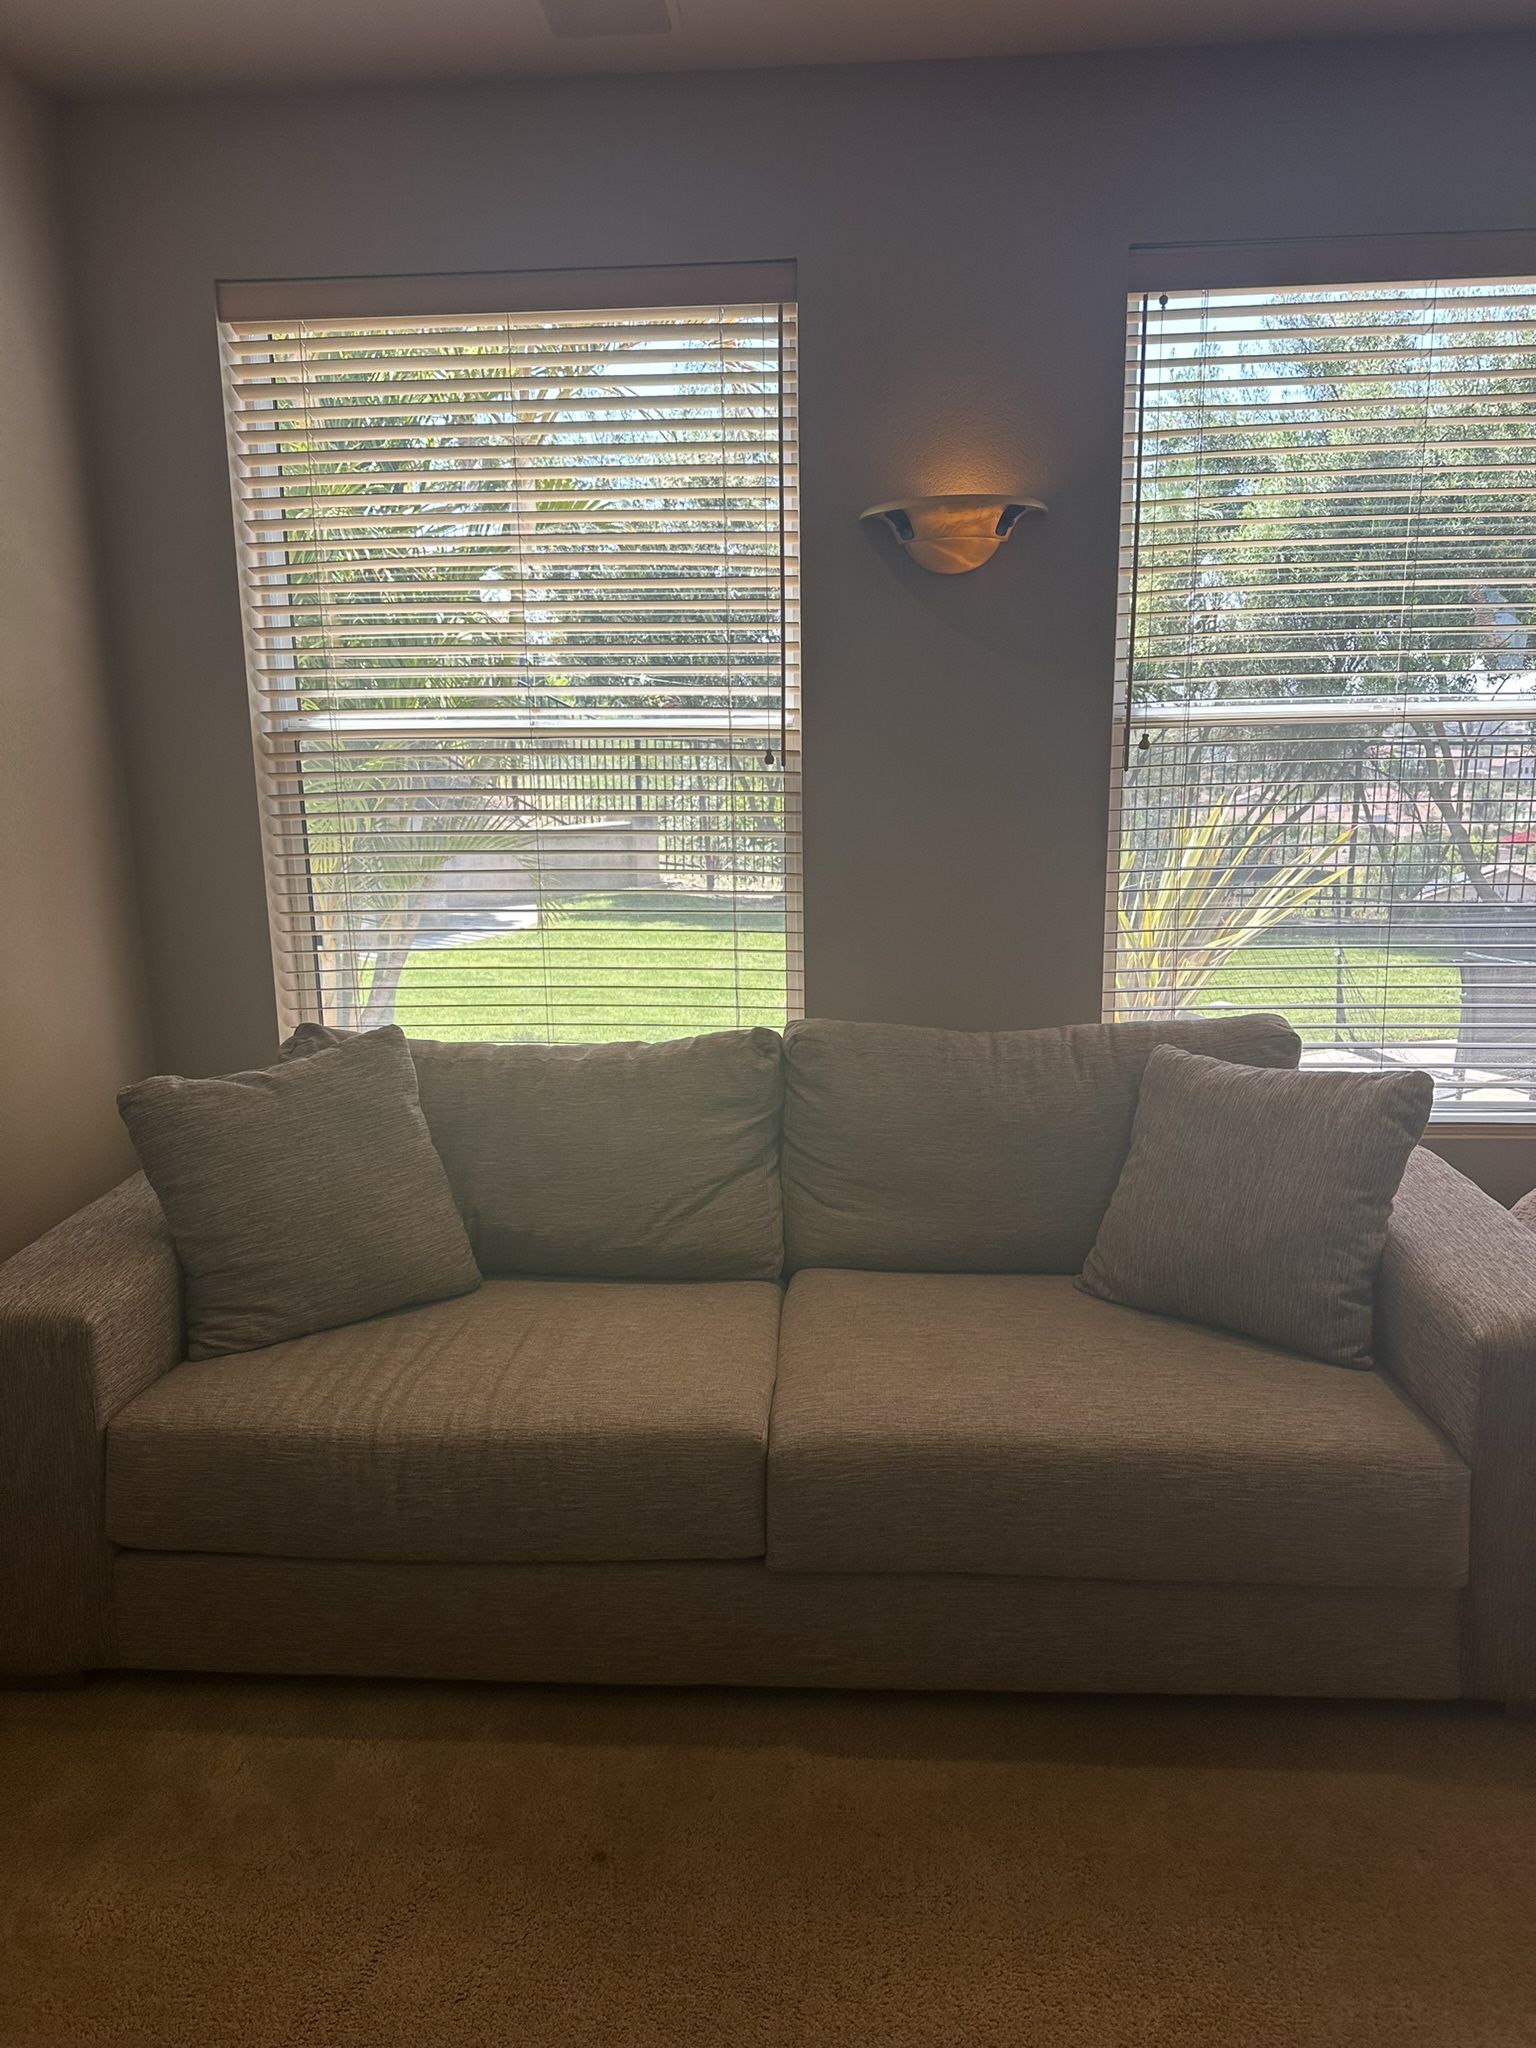 New Couch For Sale 